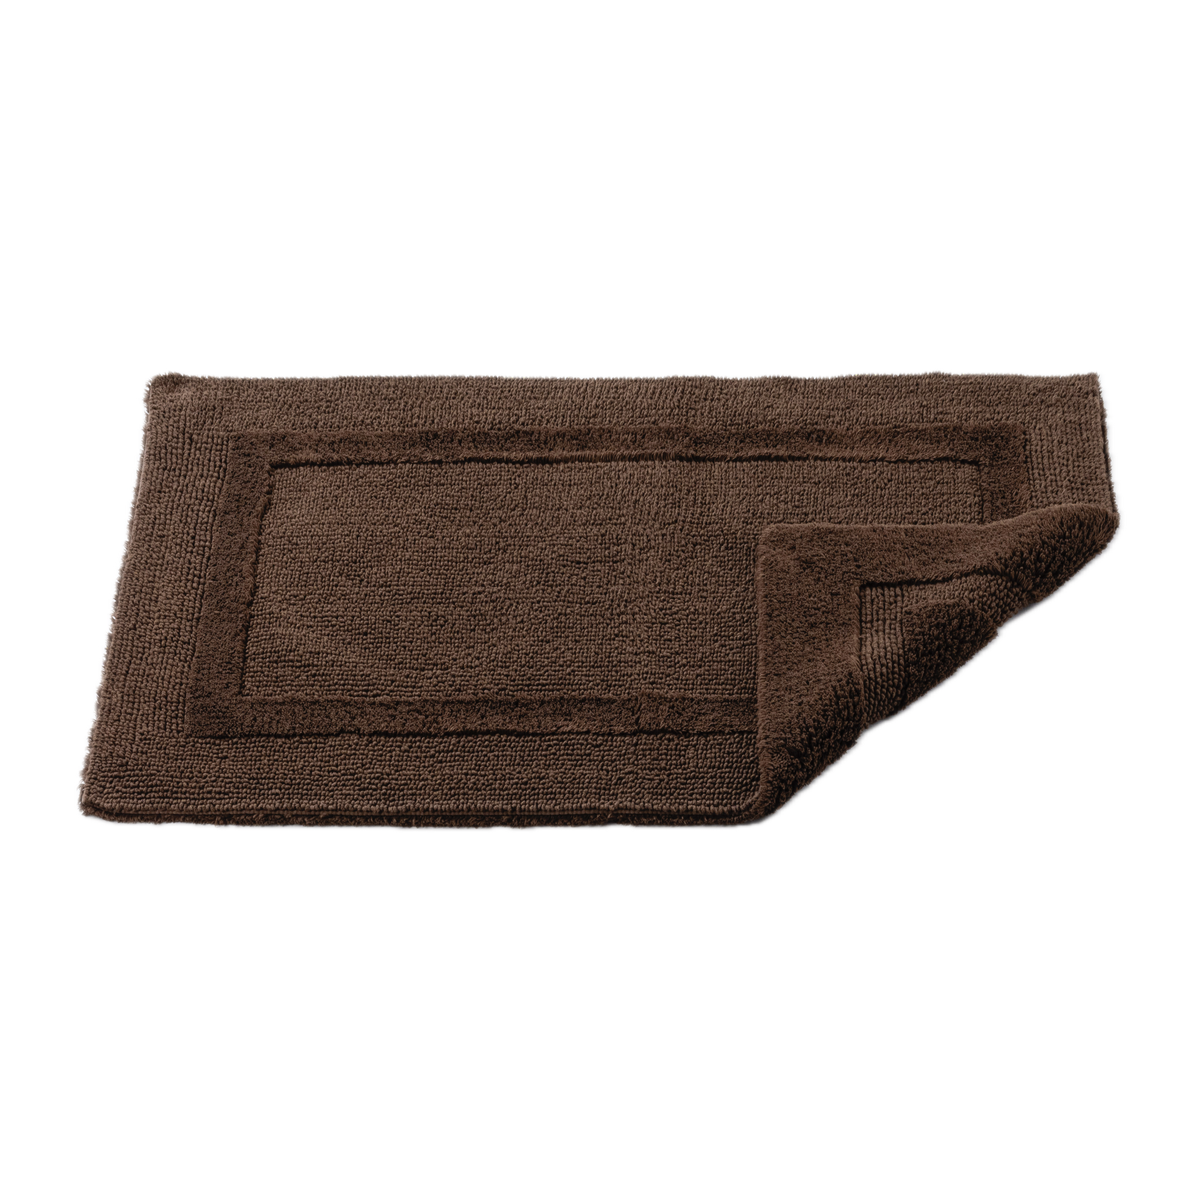 Abyss Habidecor Reversible Bath Rug in Mustang Color with Corner Fold